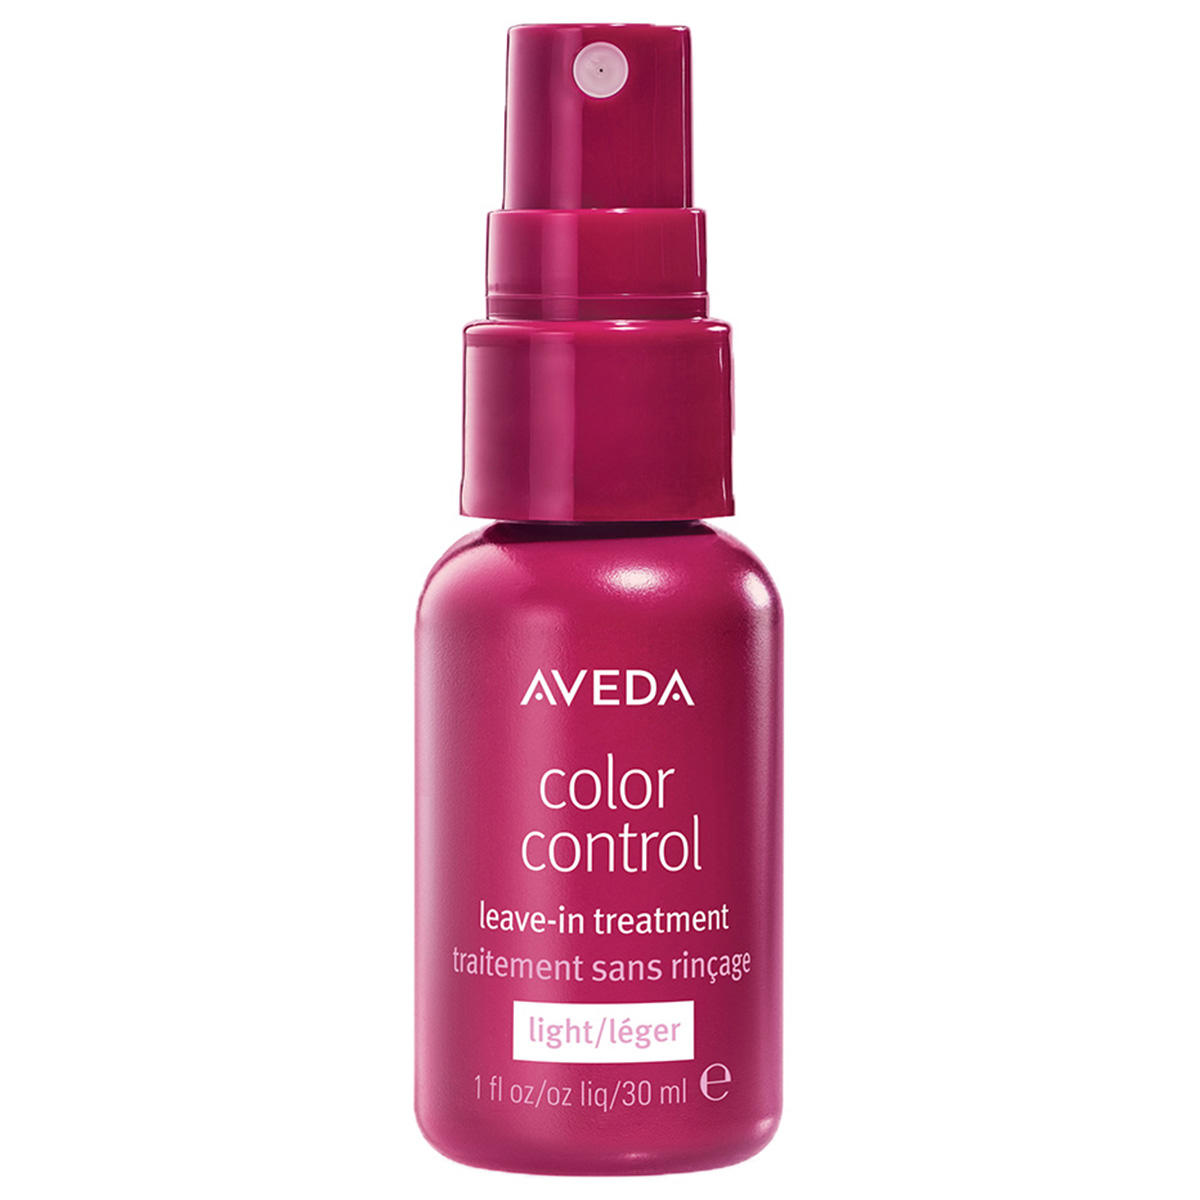 AVEDA Color Control Leave-In Treatment Light 30 ml - 1